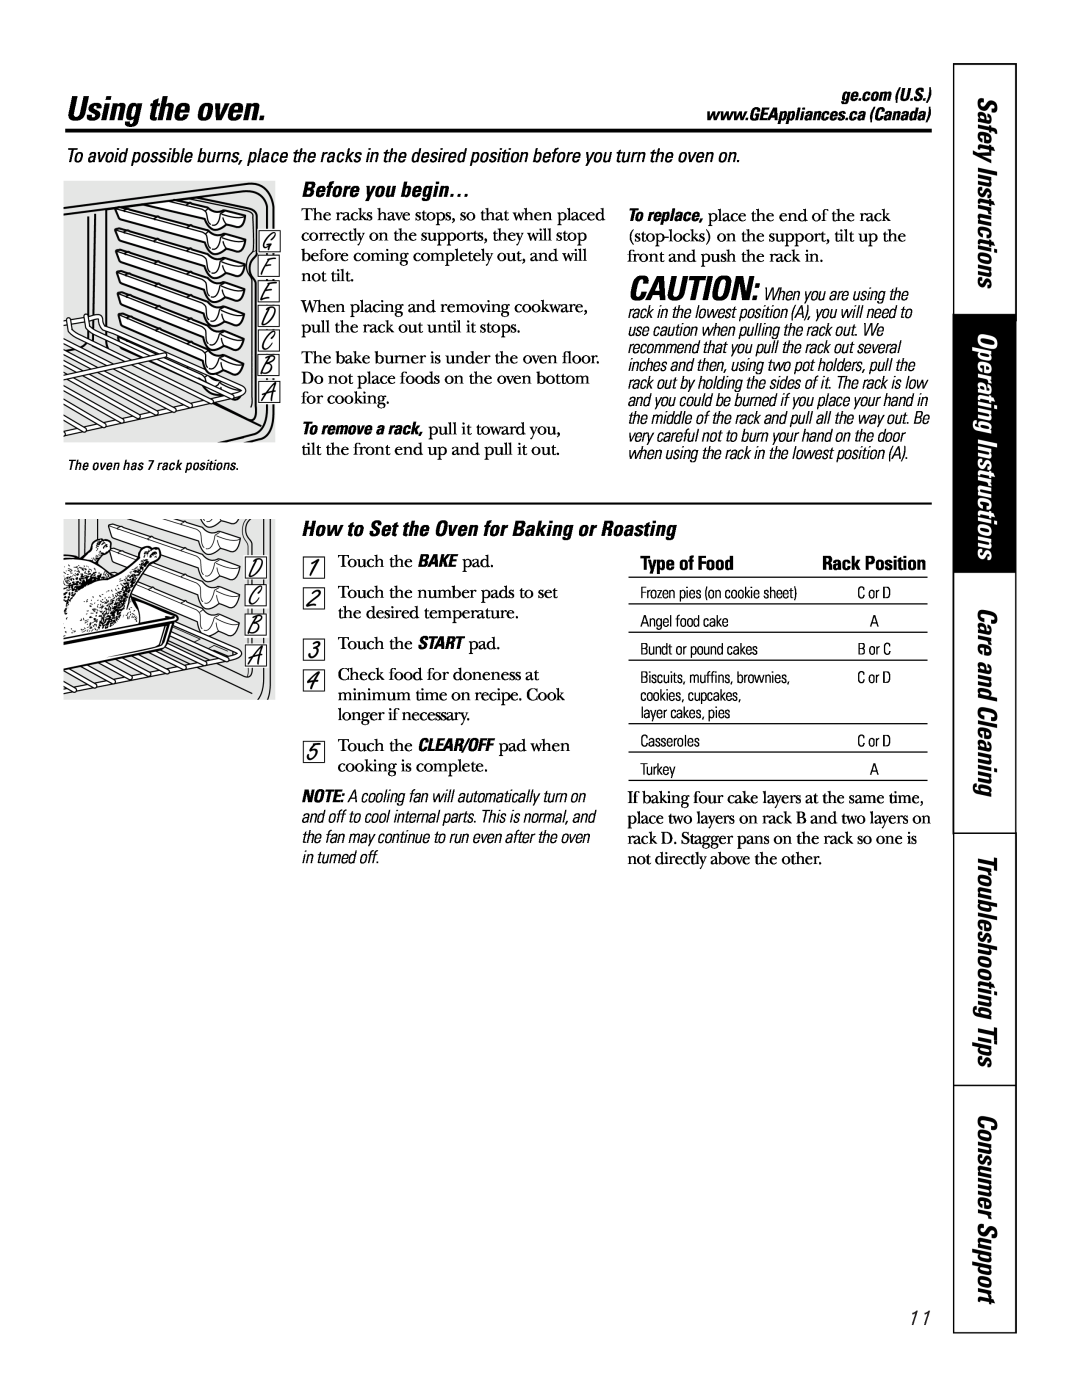 GE PGS968 Using the oven, Before you begin…, How to Set the Oven for Baking or Roasting, Type of Food, Care and Cleaning 